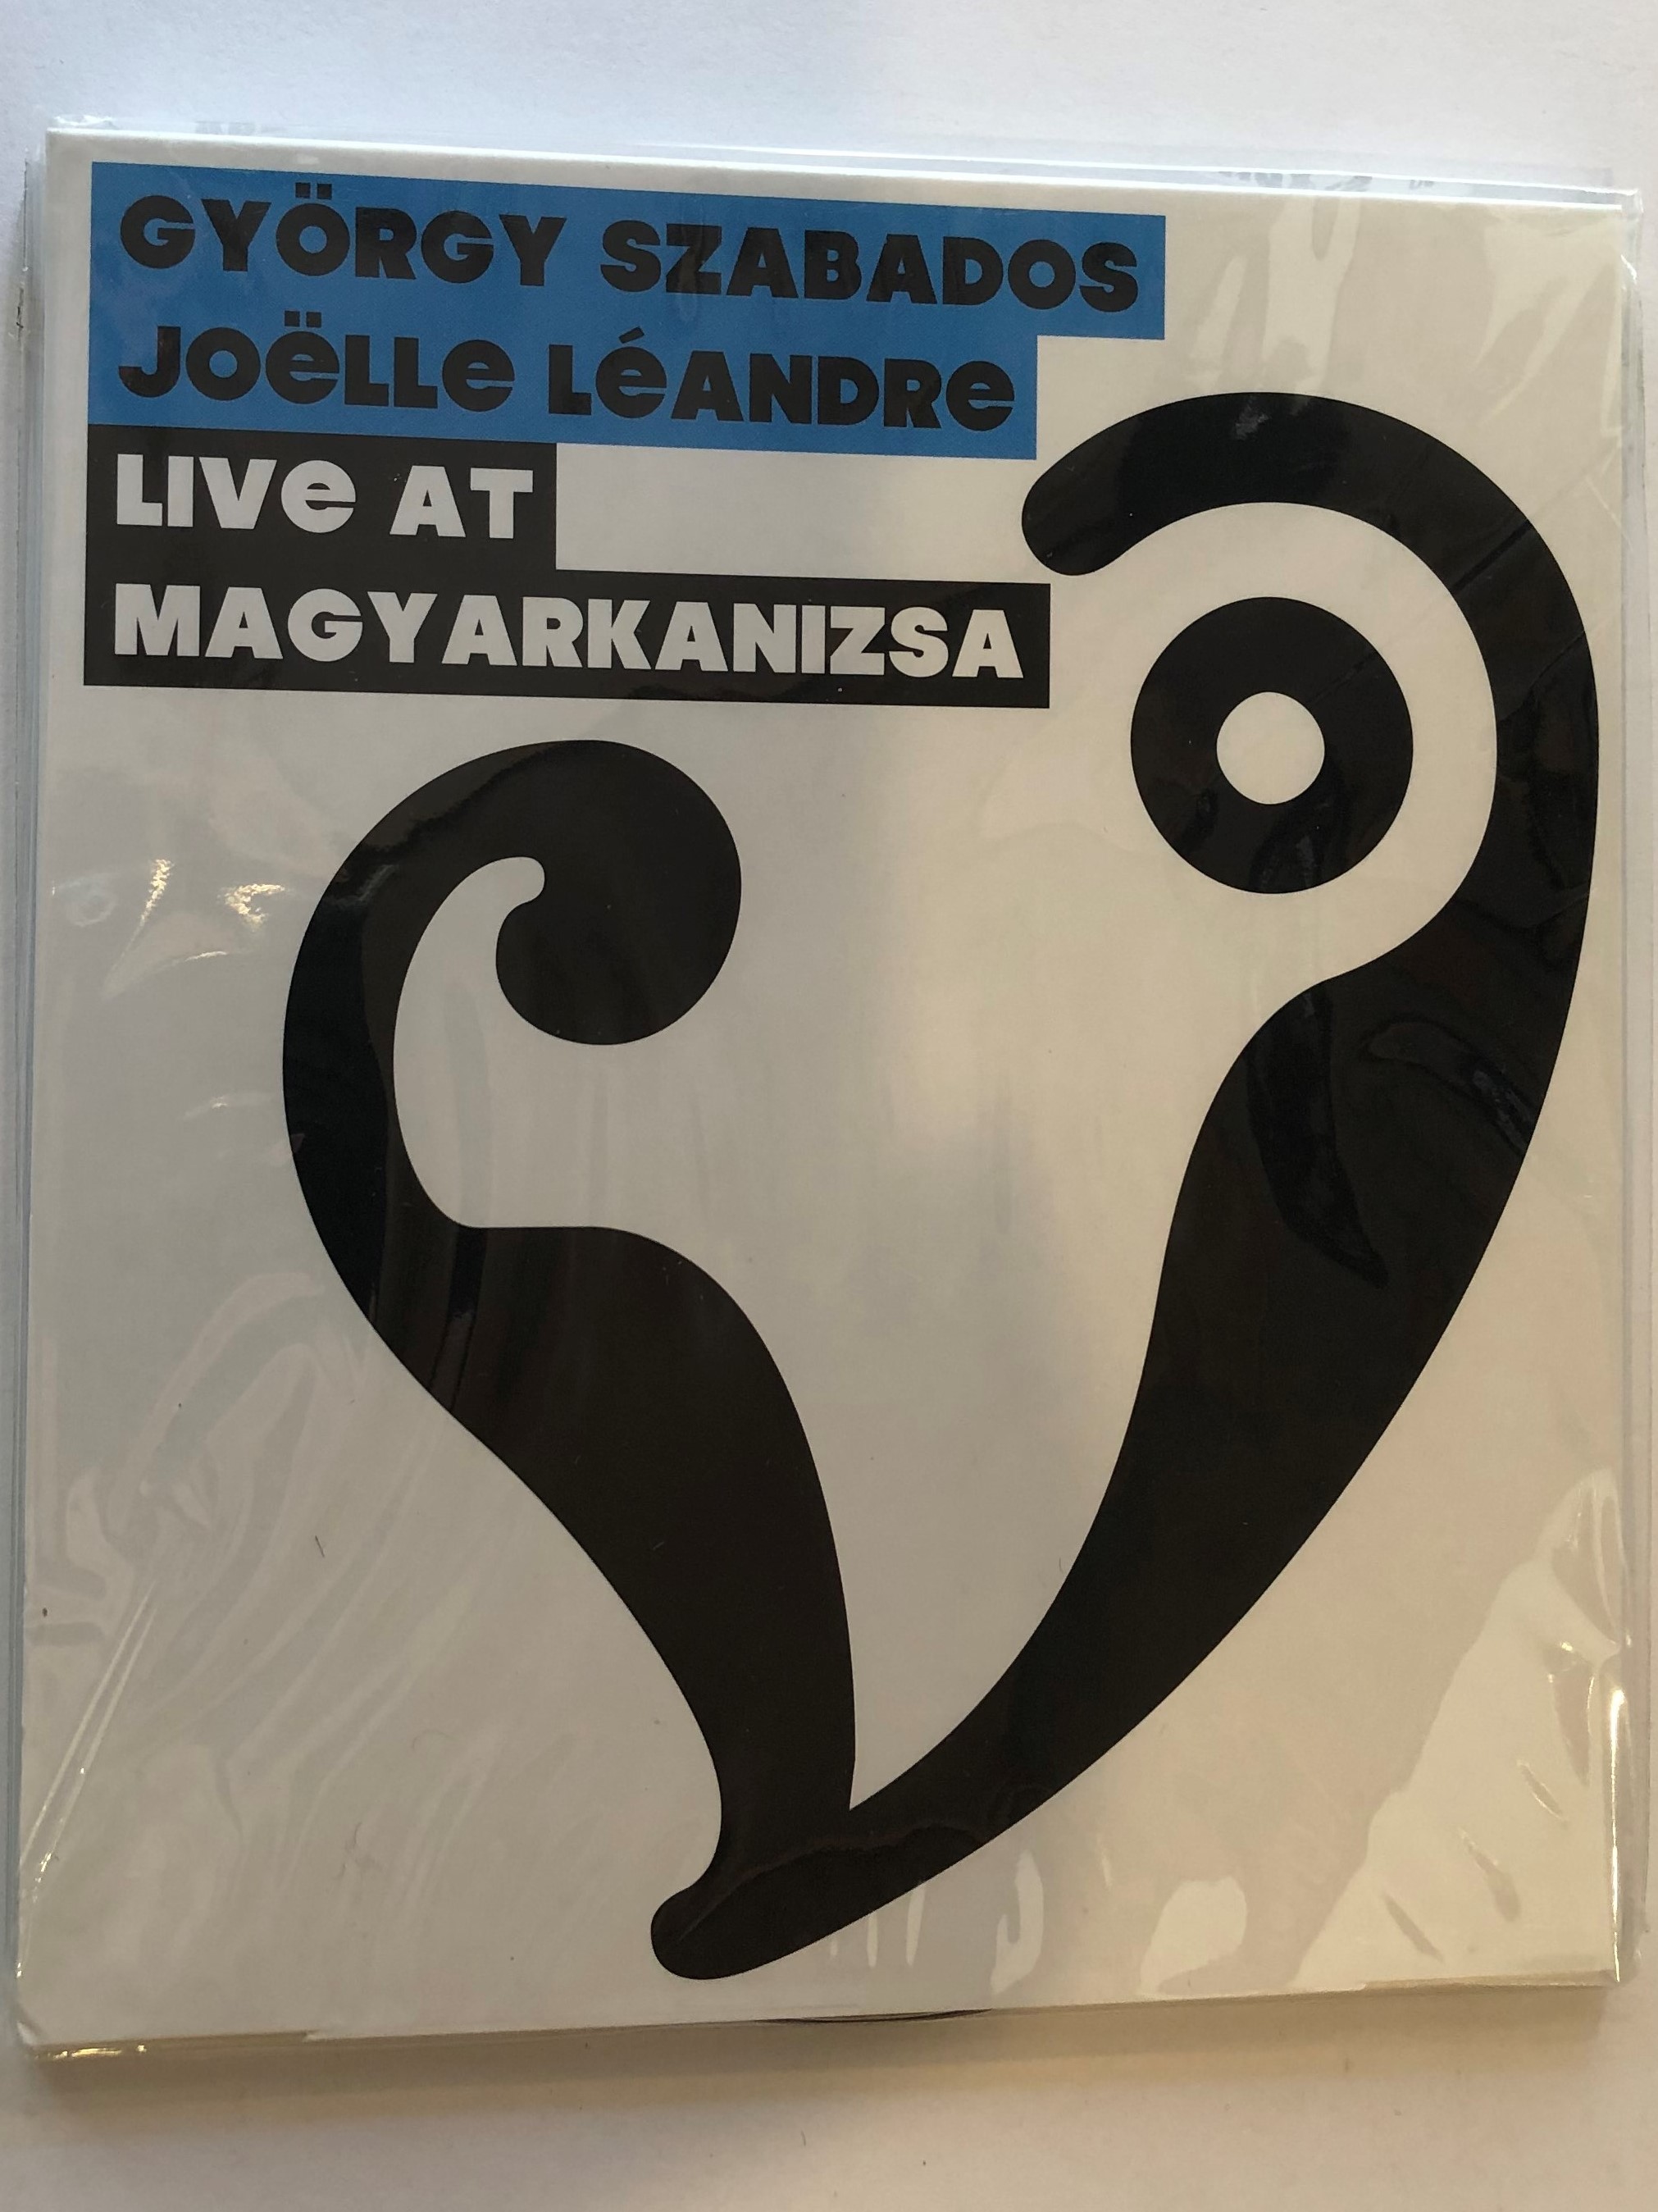 gy-rgy-szabados-jo-lle-l-andre-live-at-magyarkanizsa-budapest-music-center-records-audio-cd-2011-bmc-cd-183-1-.jpg